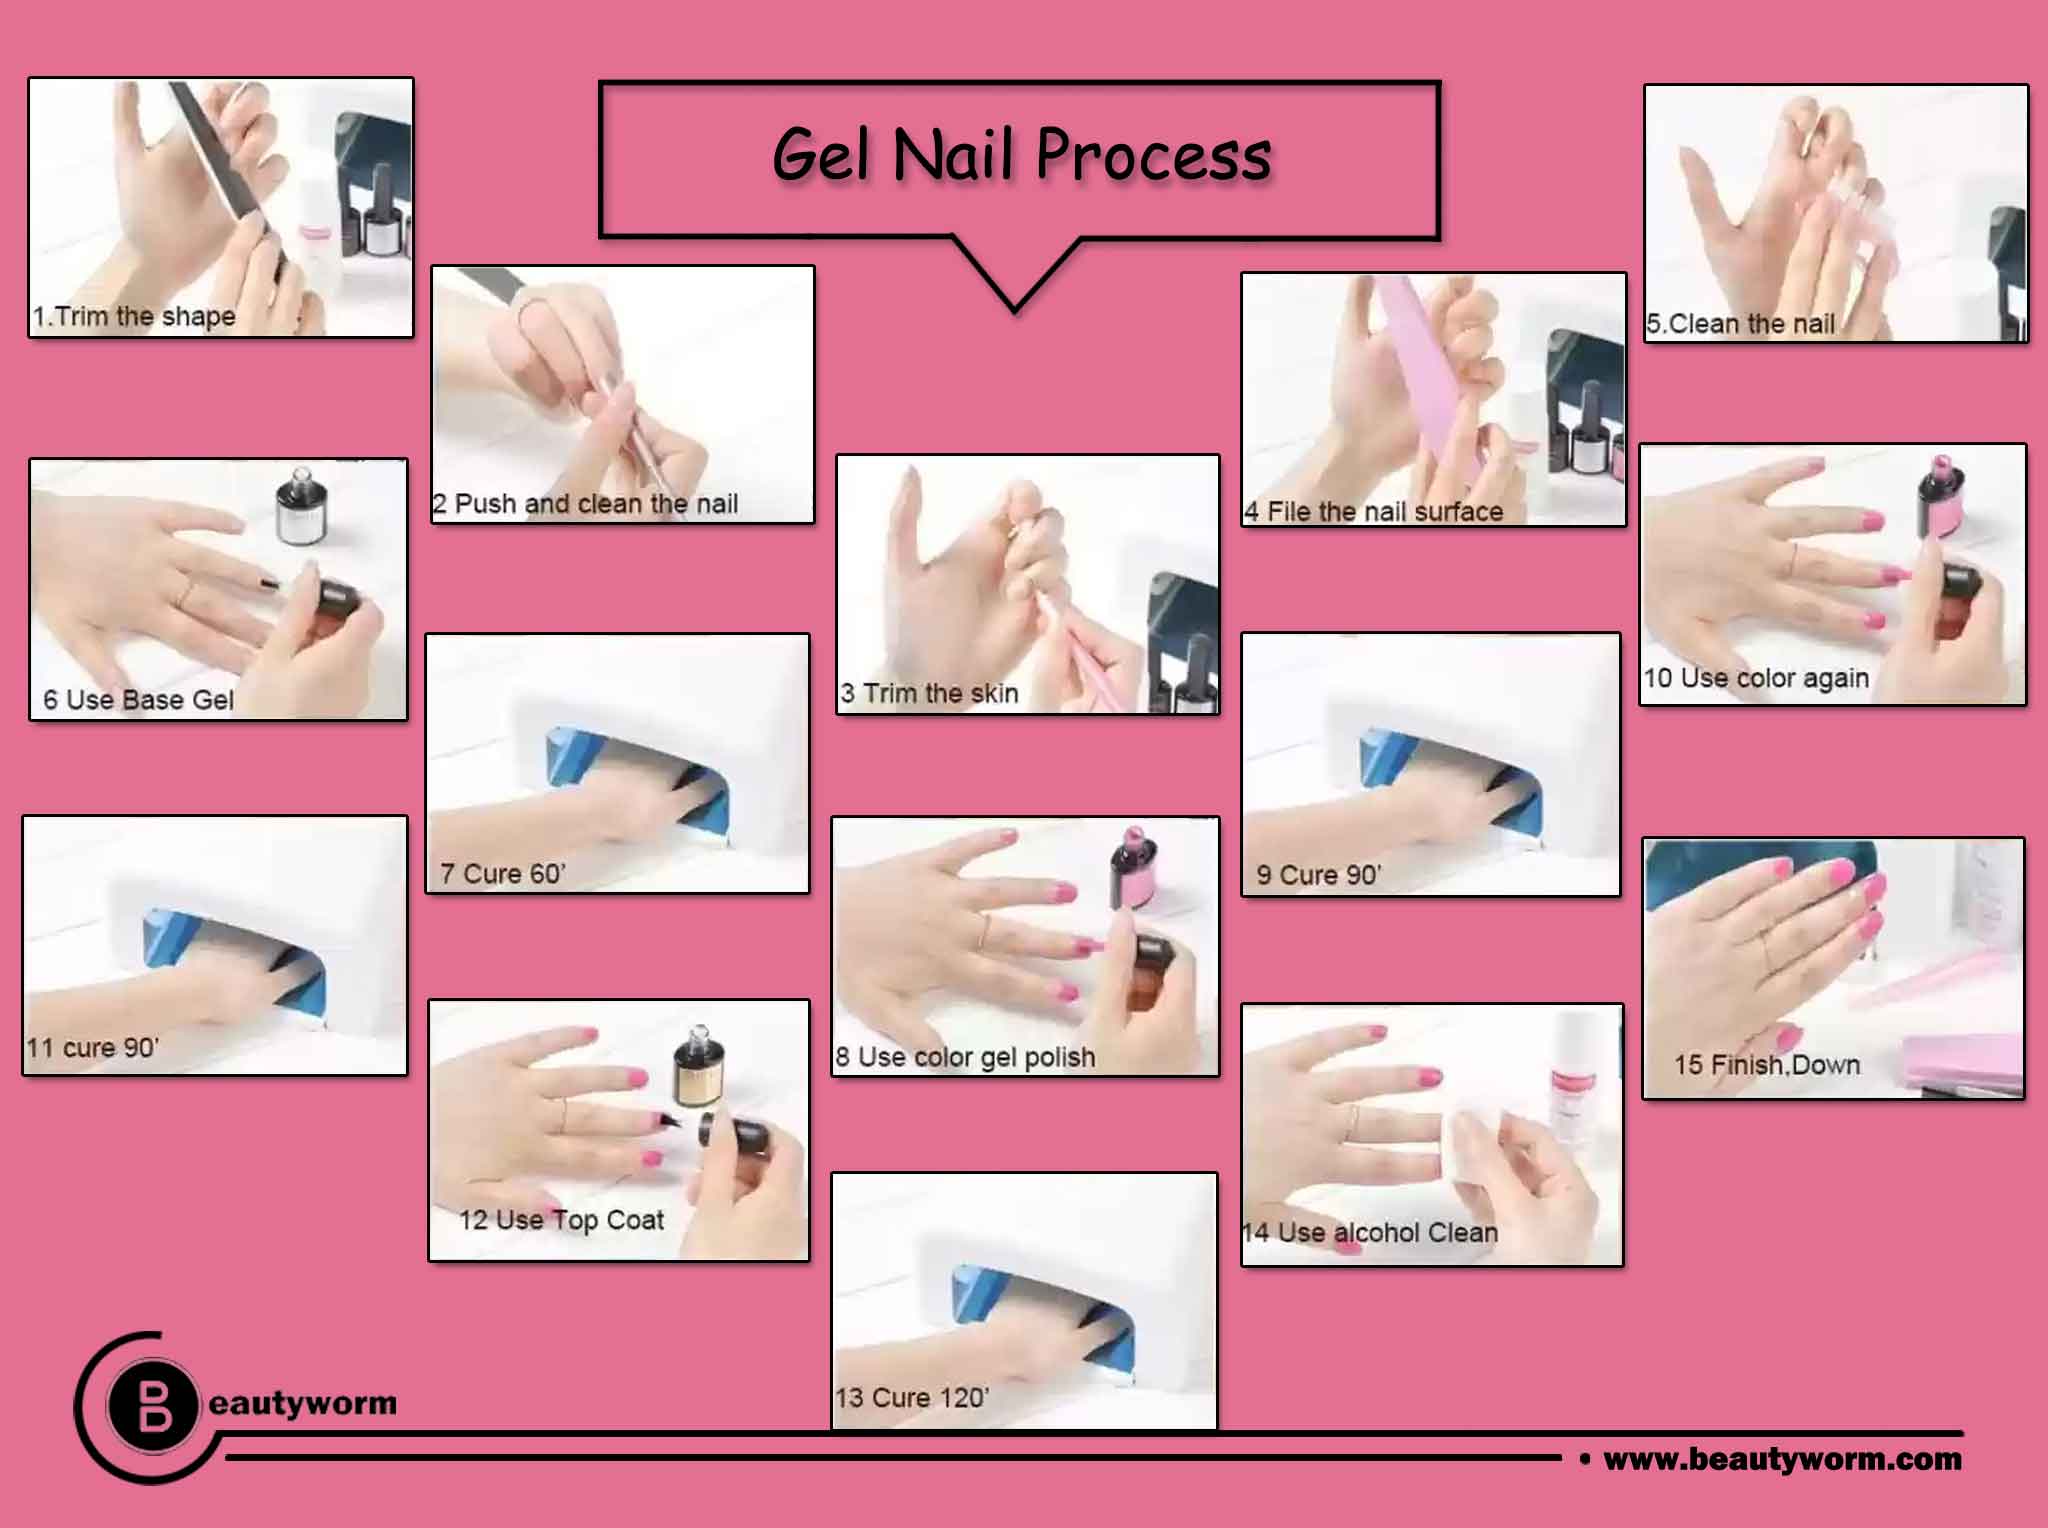 How gel nails are applied?